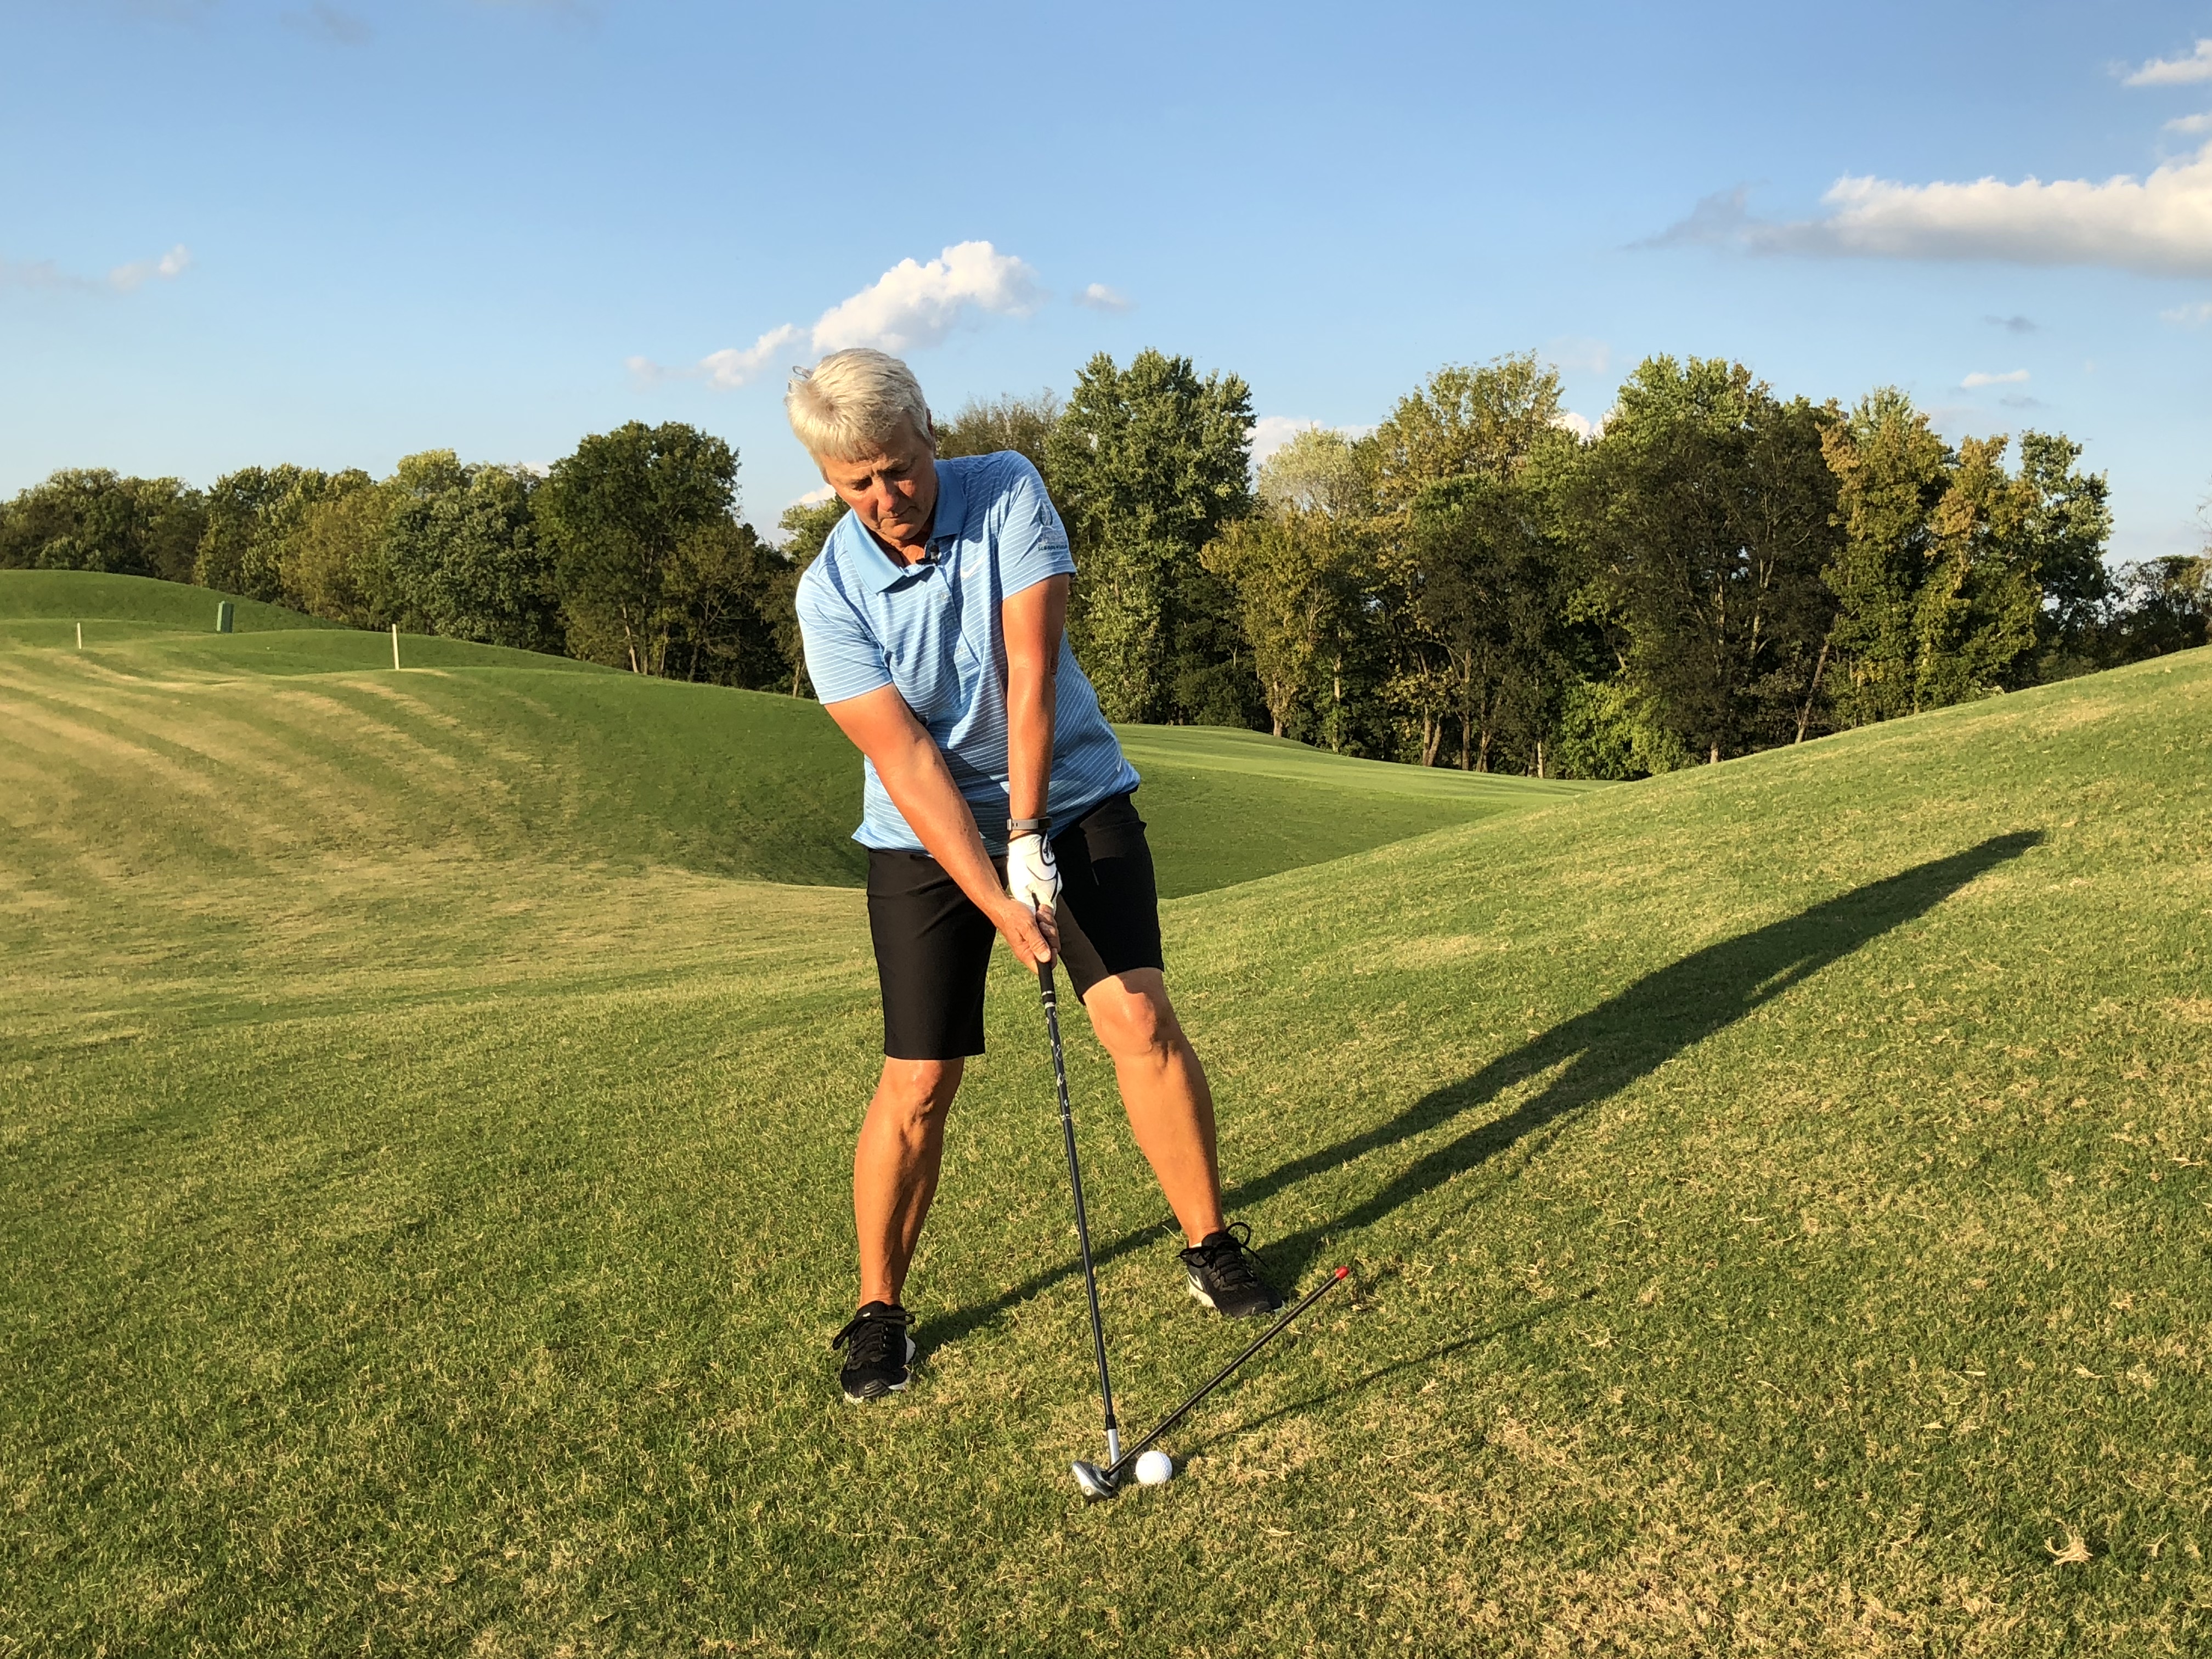 Uneven Lies - What to Expect From an Uphill Lie - Nancy Quarcelino School  of Golf